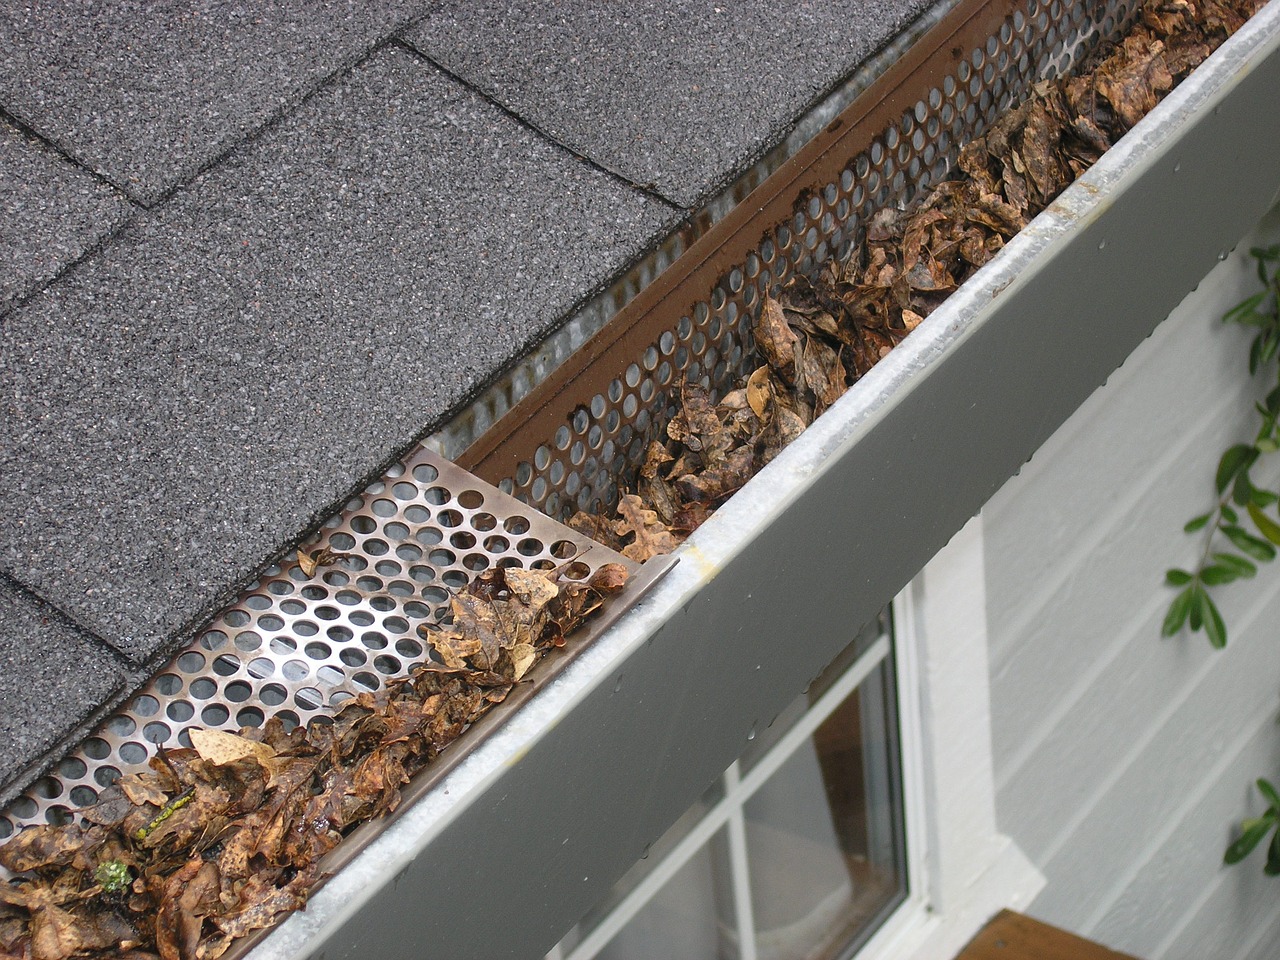 How to Know When It’s Time to Clean Out Your Gutters